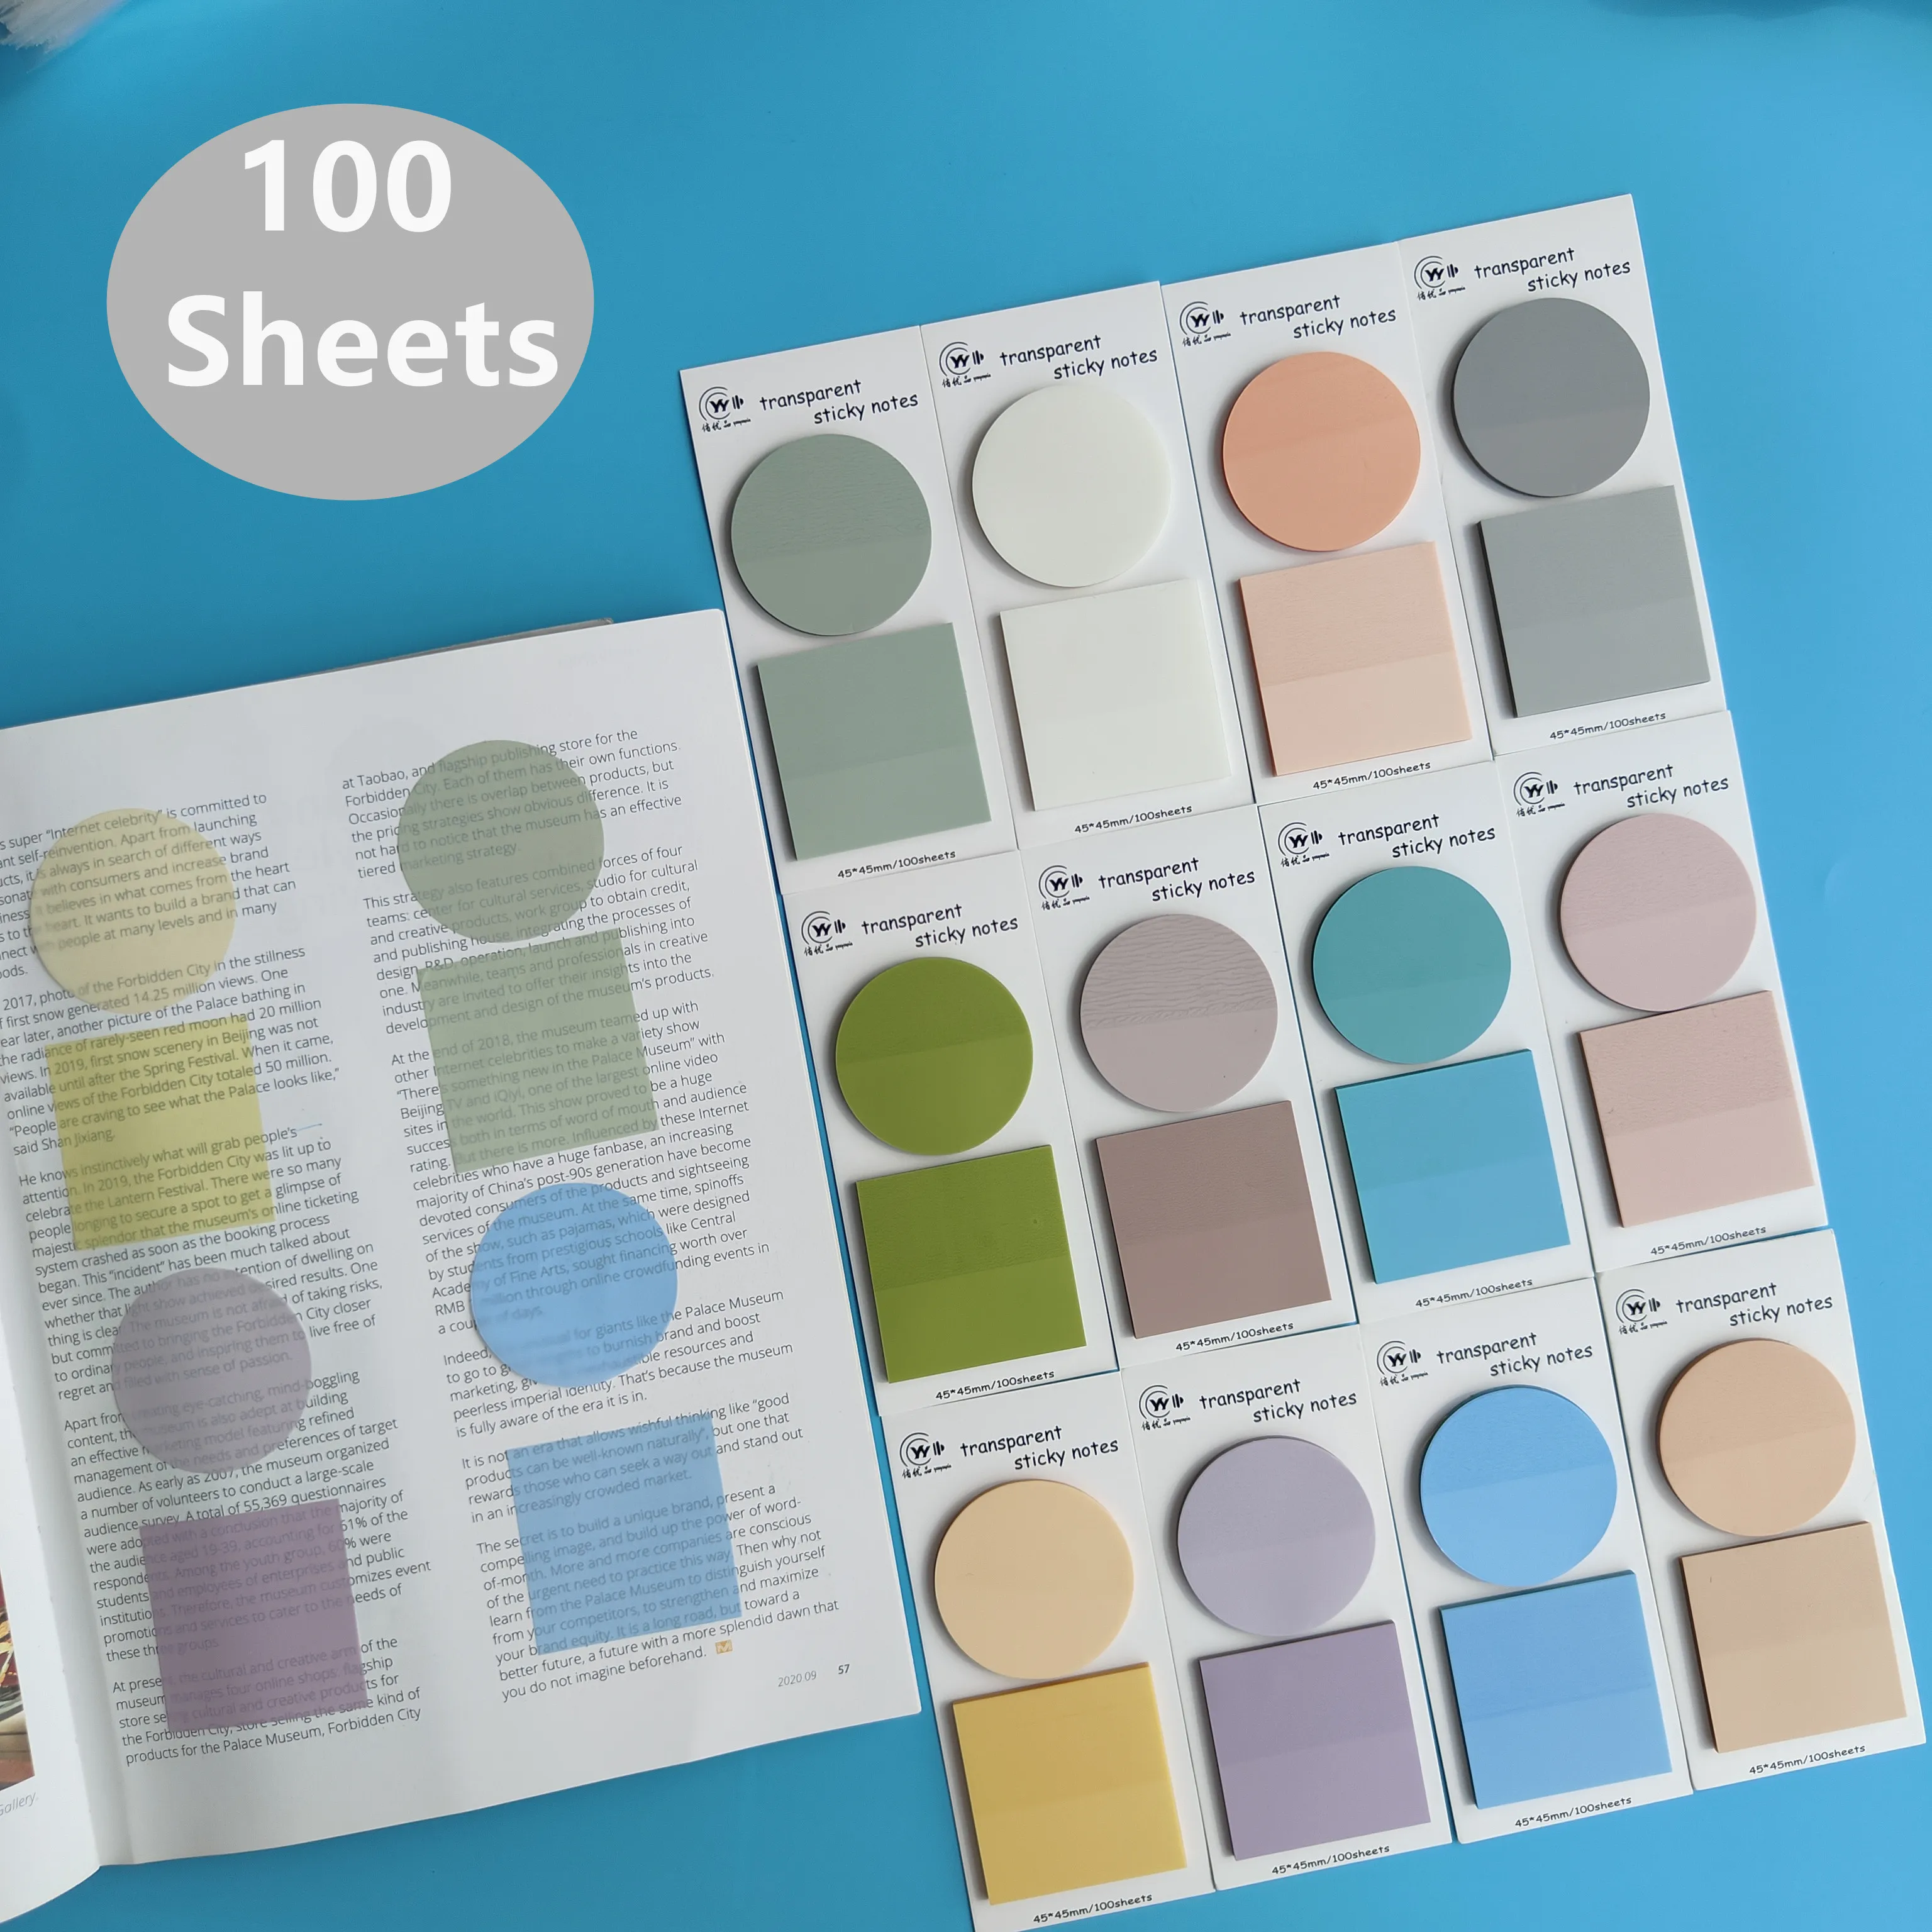 100 Sheets Posted It Transparent Sticky Notes Self-Adhesive Annotation Books Notepad Bookmarks Memo Pad Index Tabs Stationery 300 sheets posted it transparentes self adhesive sticky notes annotation reading books index bookmarks tabs stationery kawaii